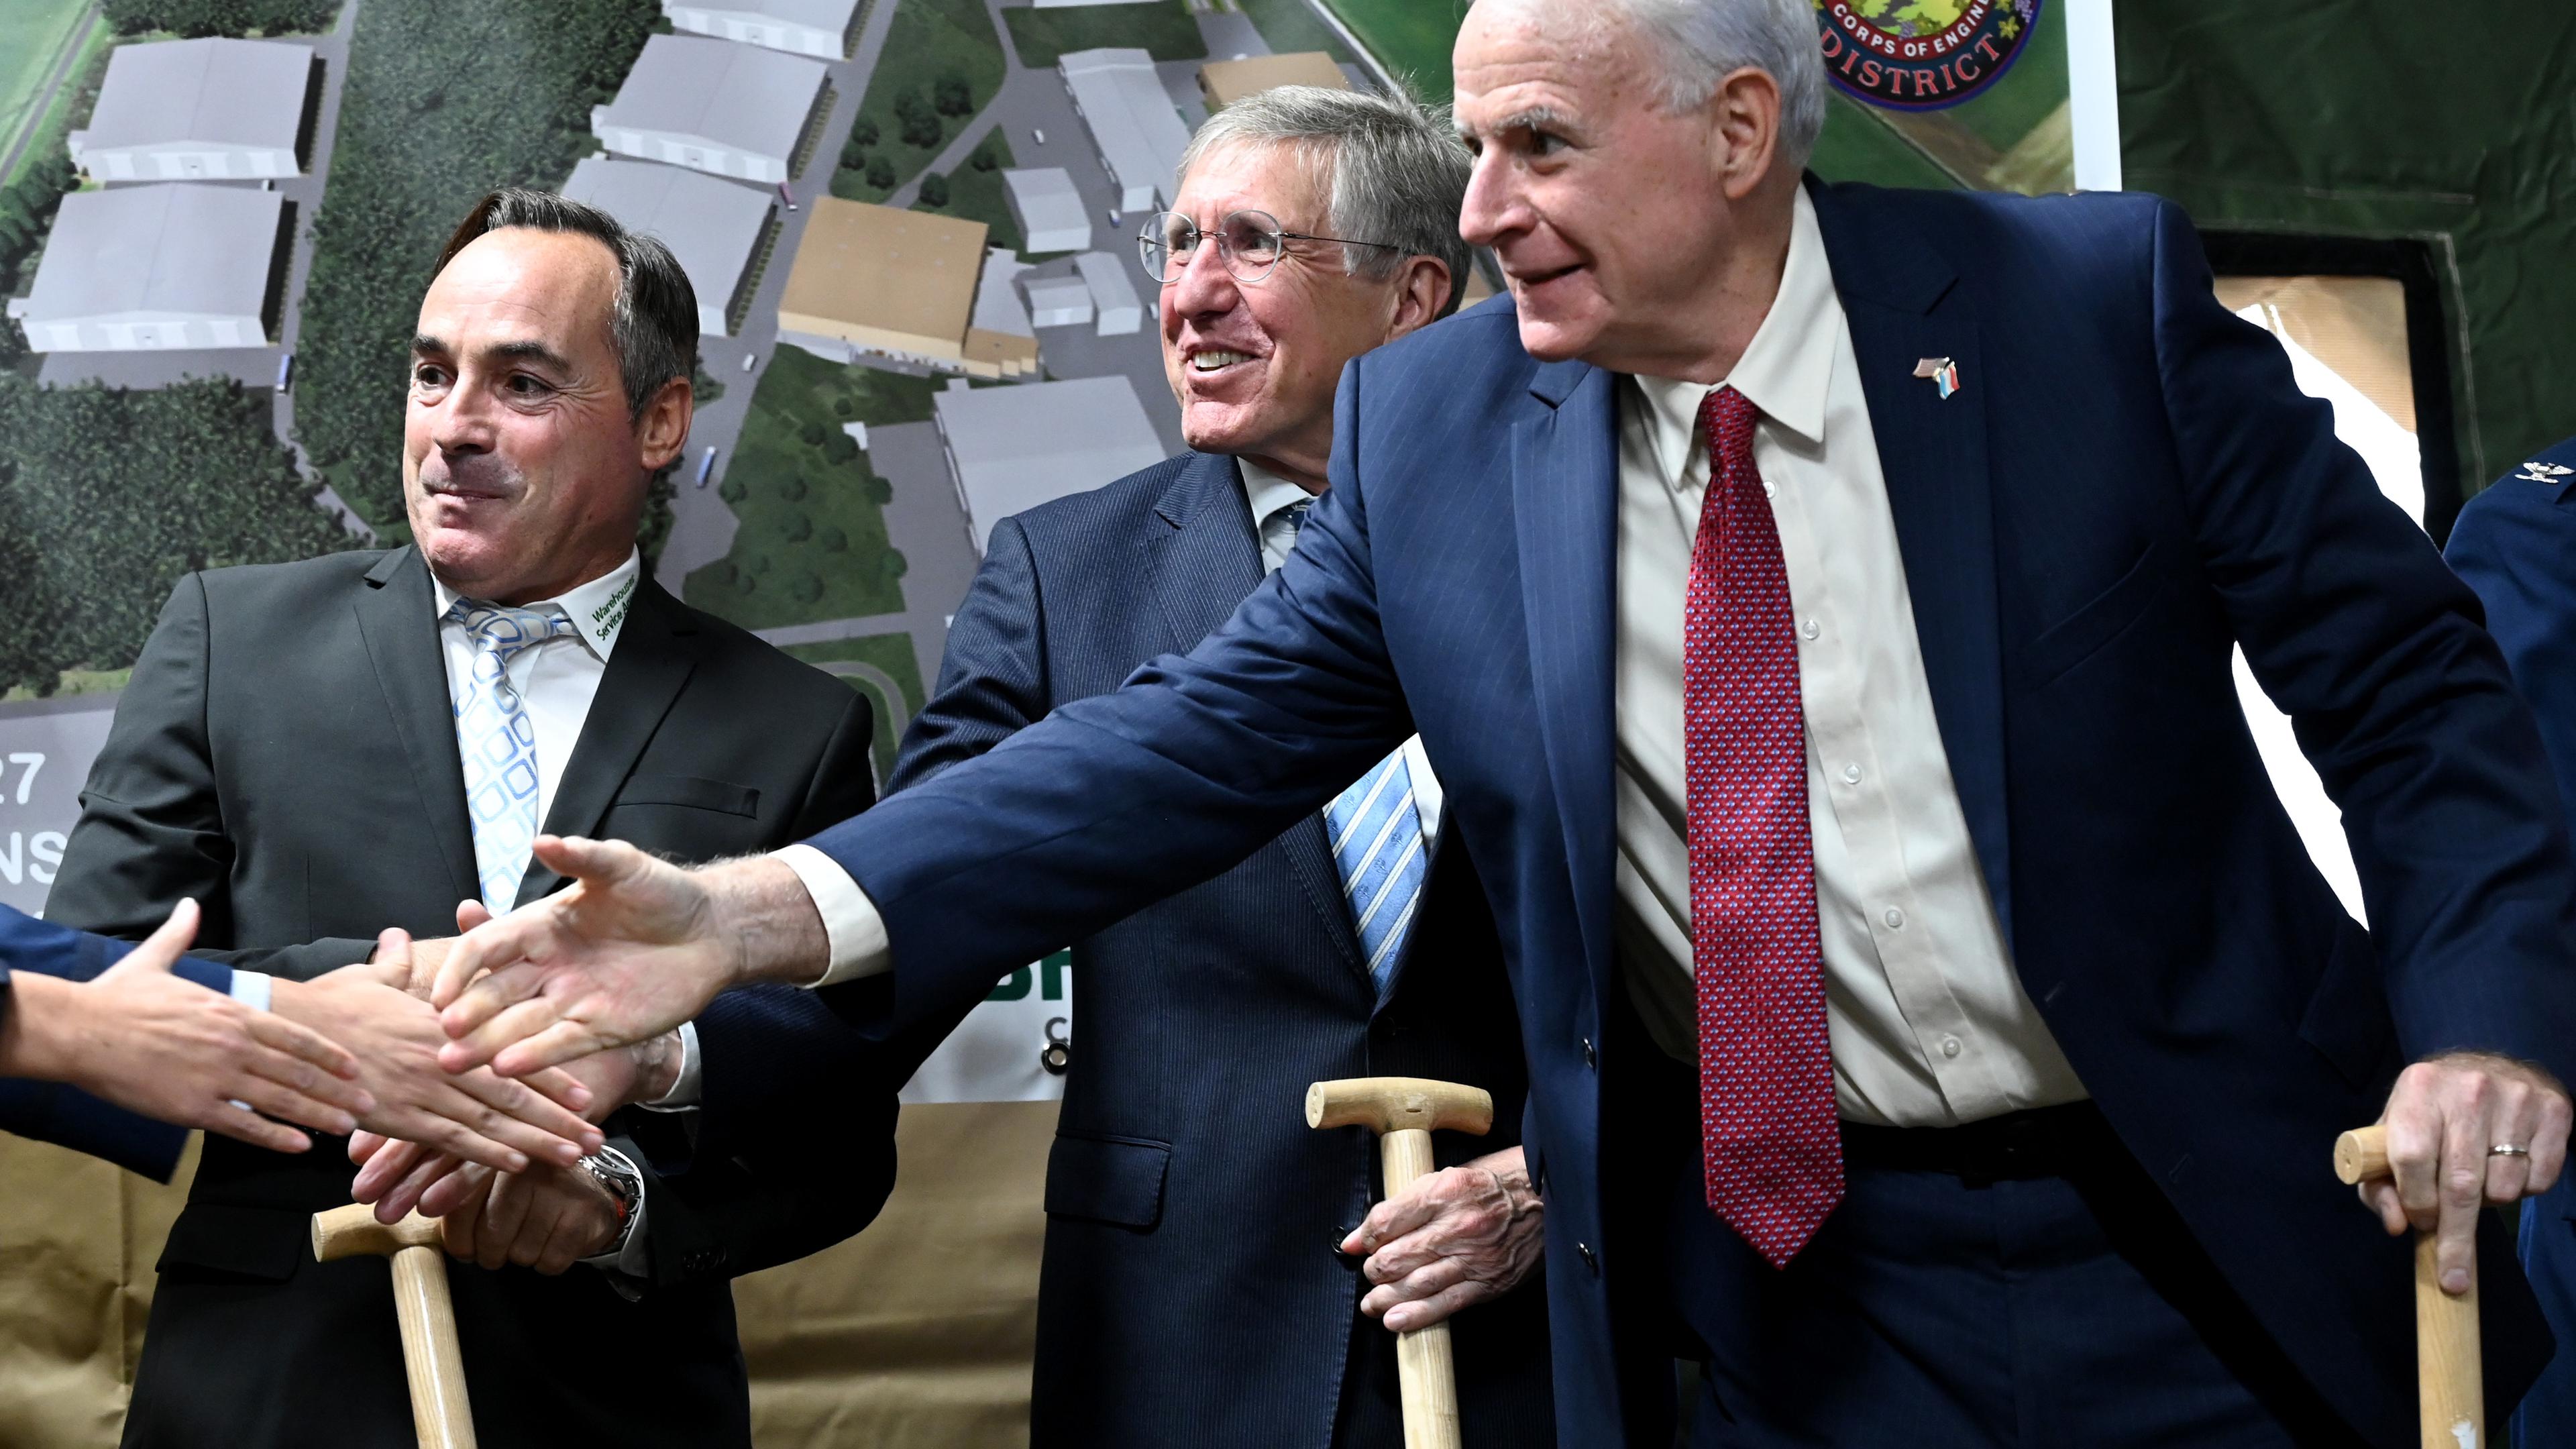 US Ambassador to Luxembourg Tom Barrett (right) extends his hand as Defence Minister Francois Bausch (second from right) and Warehouse Service Agency Director Laurent Bodson look on during a ground-breaking ceremony on Thursday